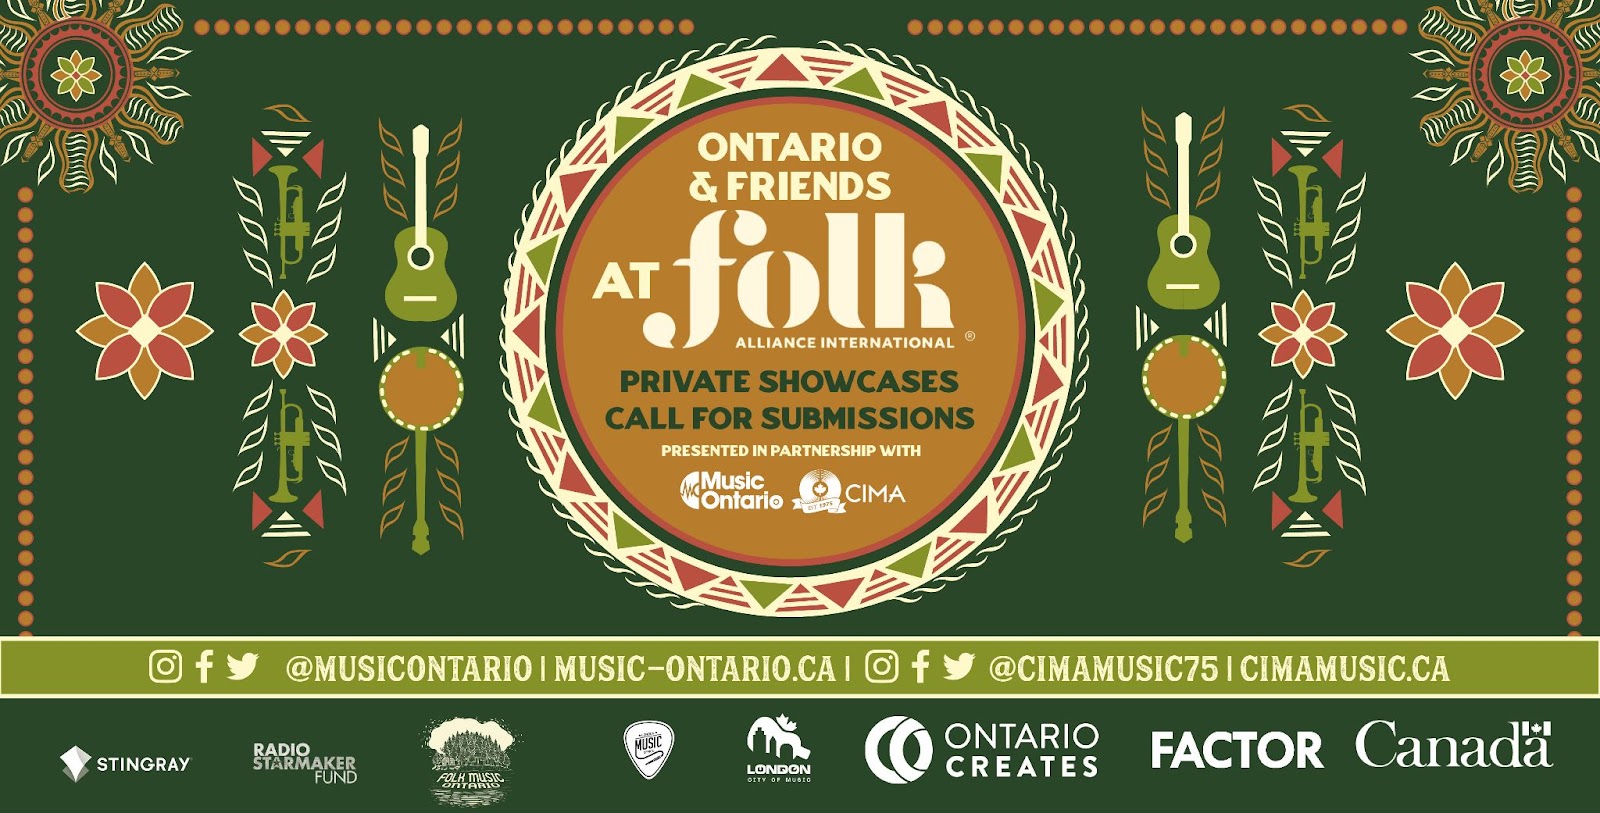 Dark green poster with images of flowers, guitars, and trumpets. Text reads: Ontario & Friends at Folk Alliance International. Private Showcase Call for Submissions. Presented in Partnership with Musica Ontario and Canadian Independent Music Association.